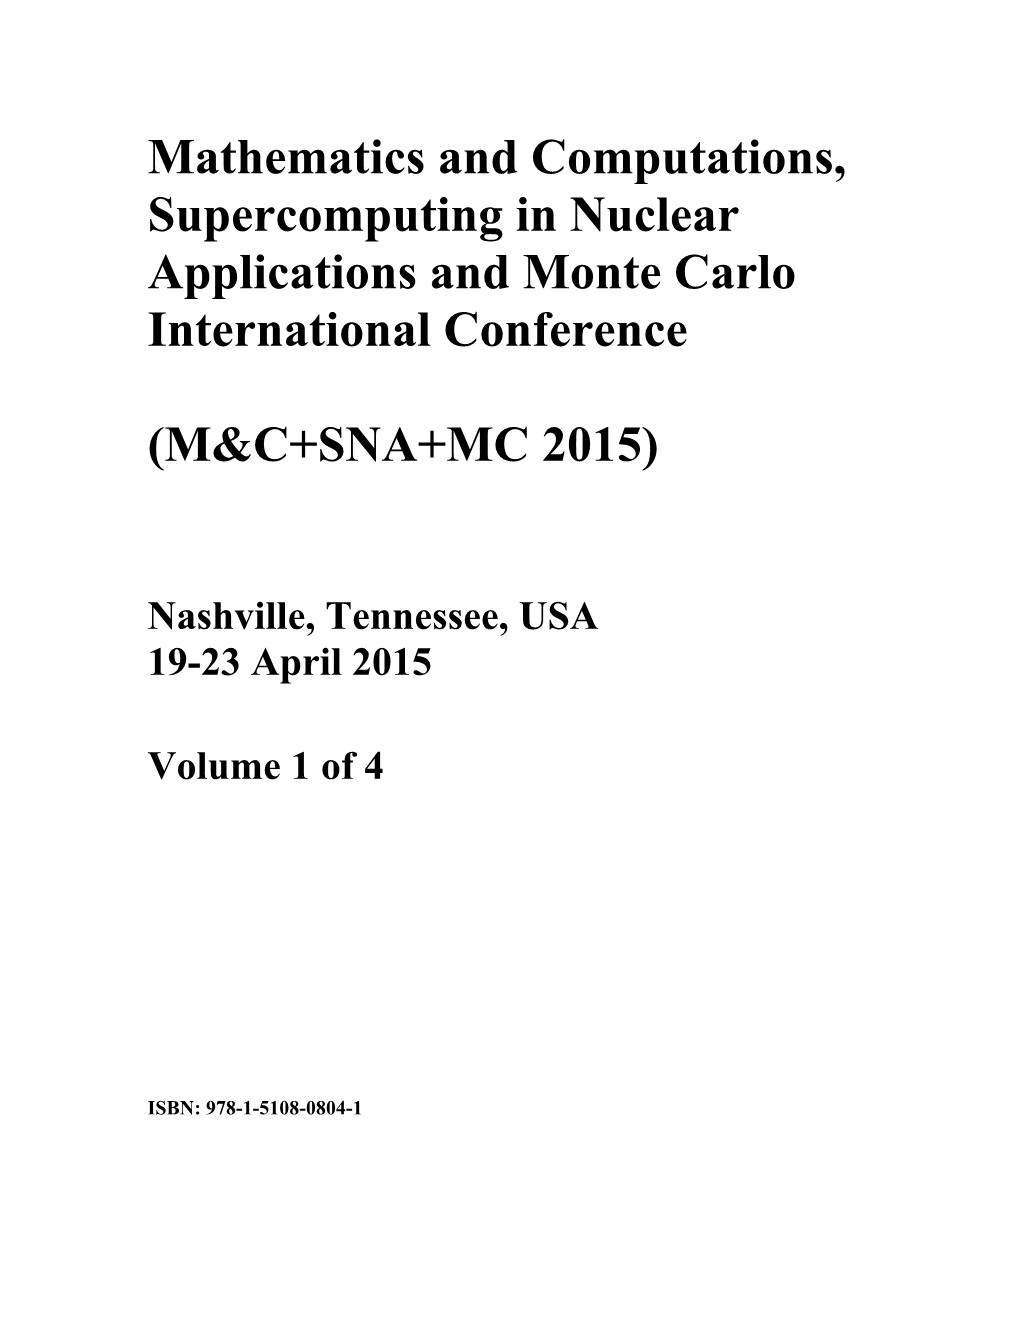 Mathematics and Computations, Supercomputing in Nuclear Applications and Monte Carlo International Conference